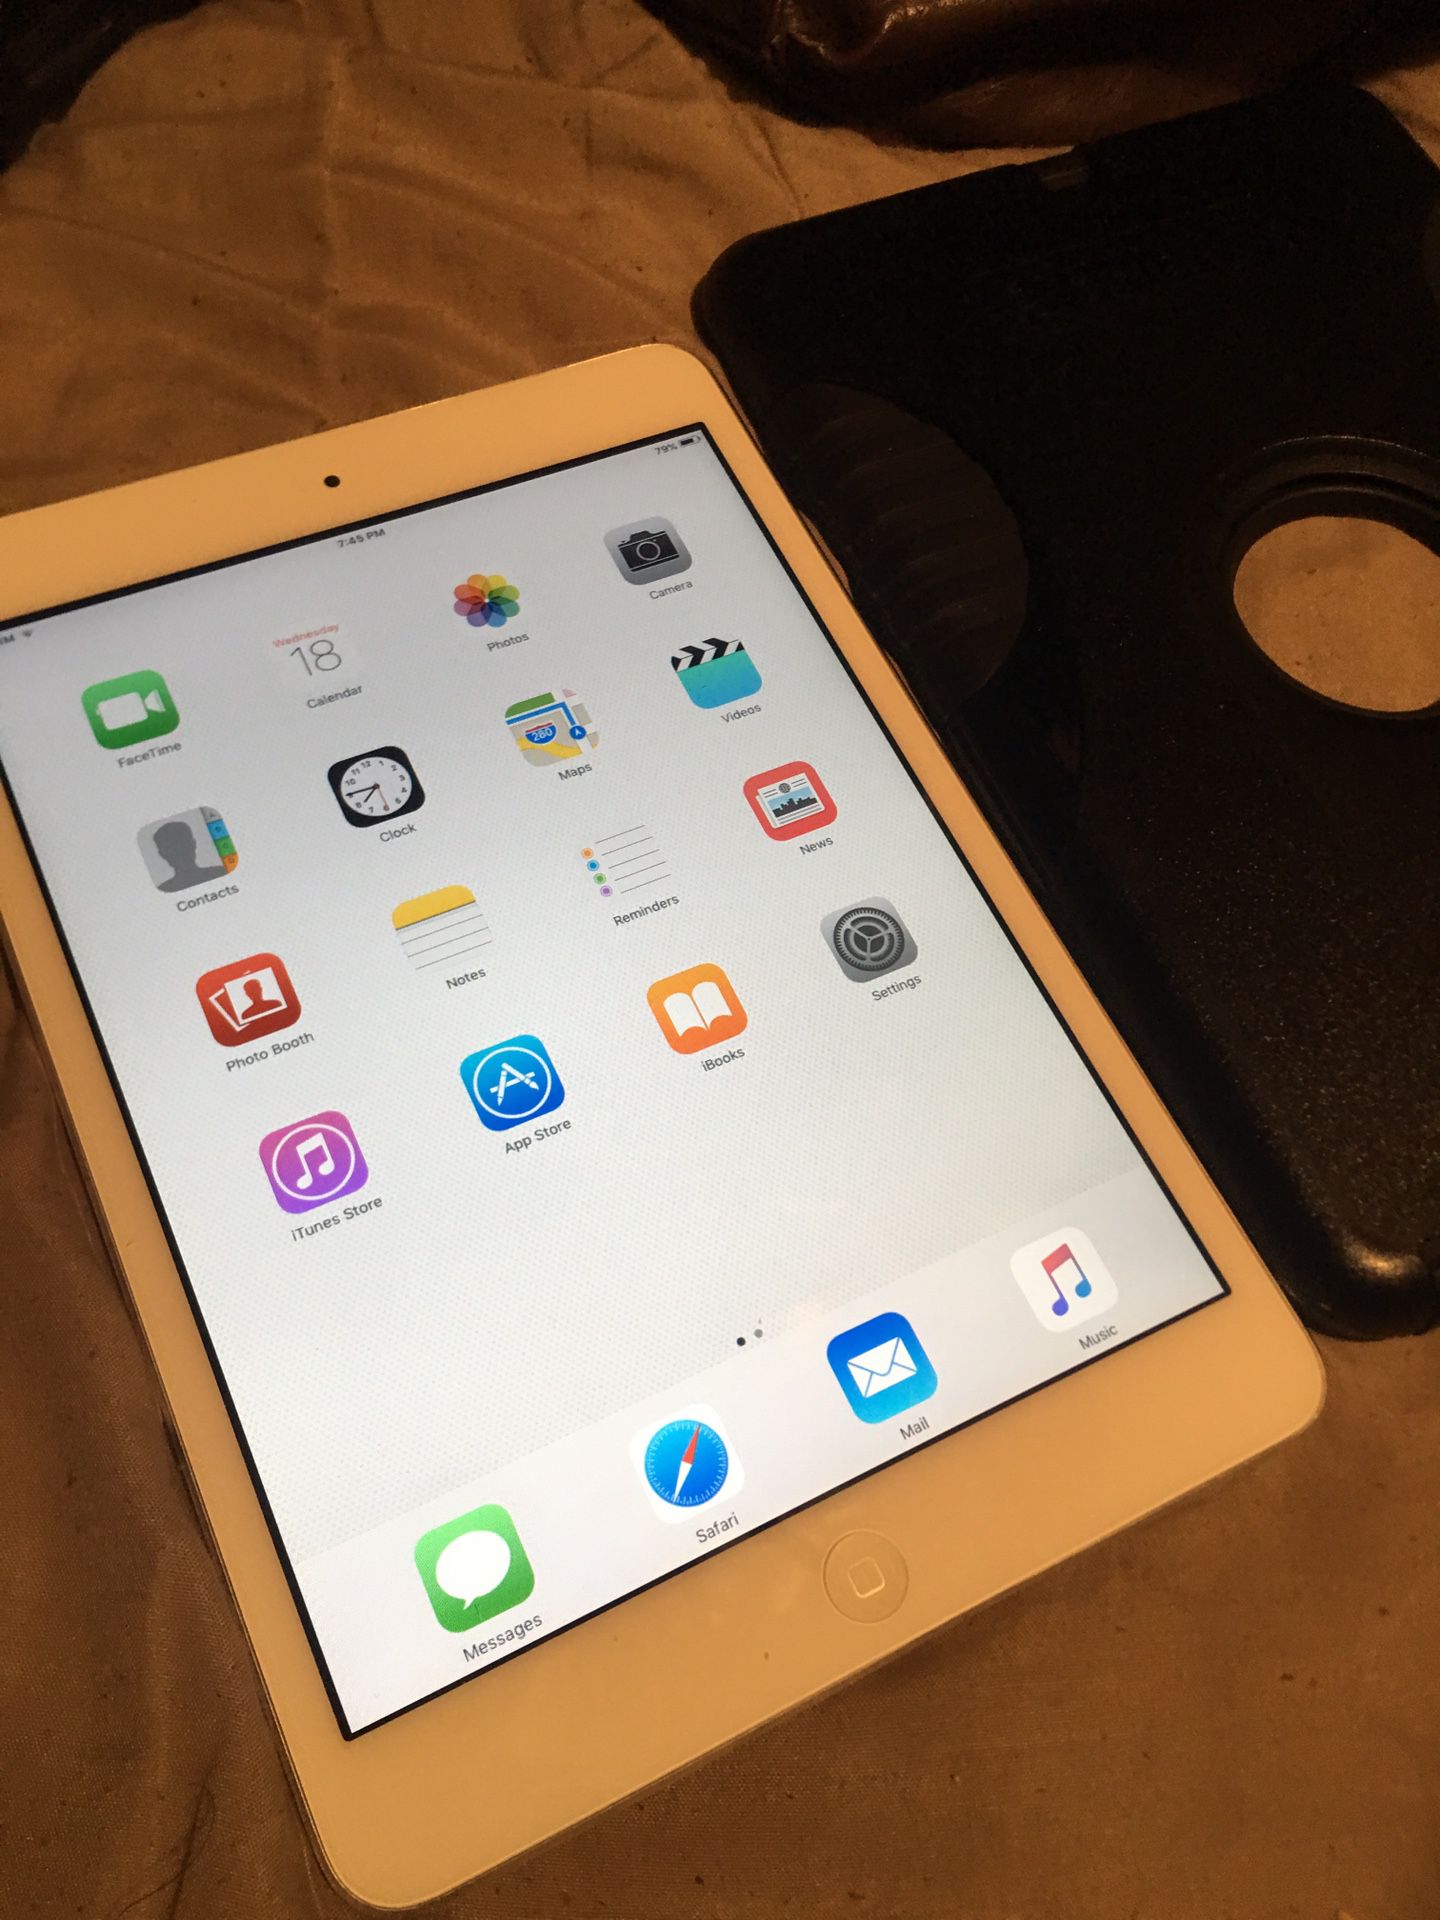 Apple /mini iPad 1 white 16GB w/Cellular SIM unlocked Charger & cable case 109 $Firm price